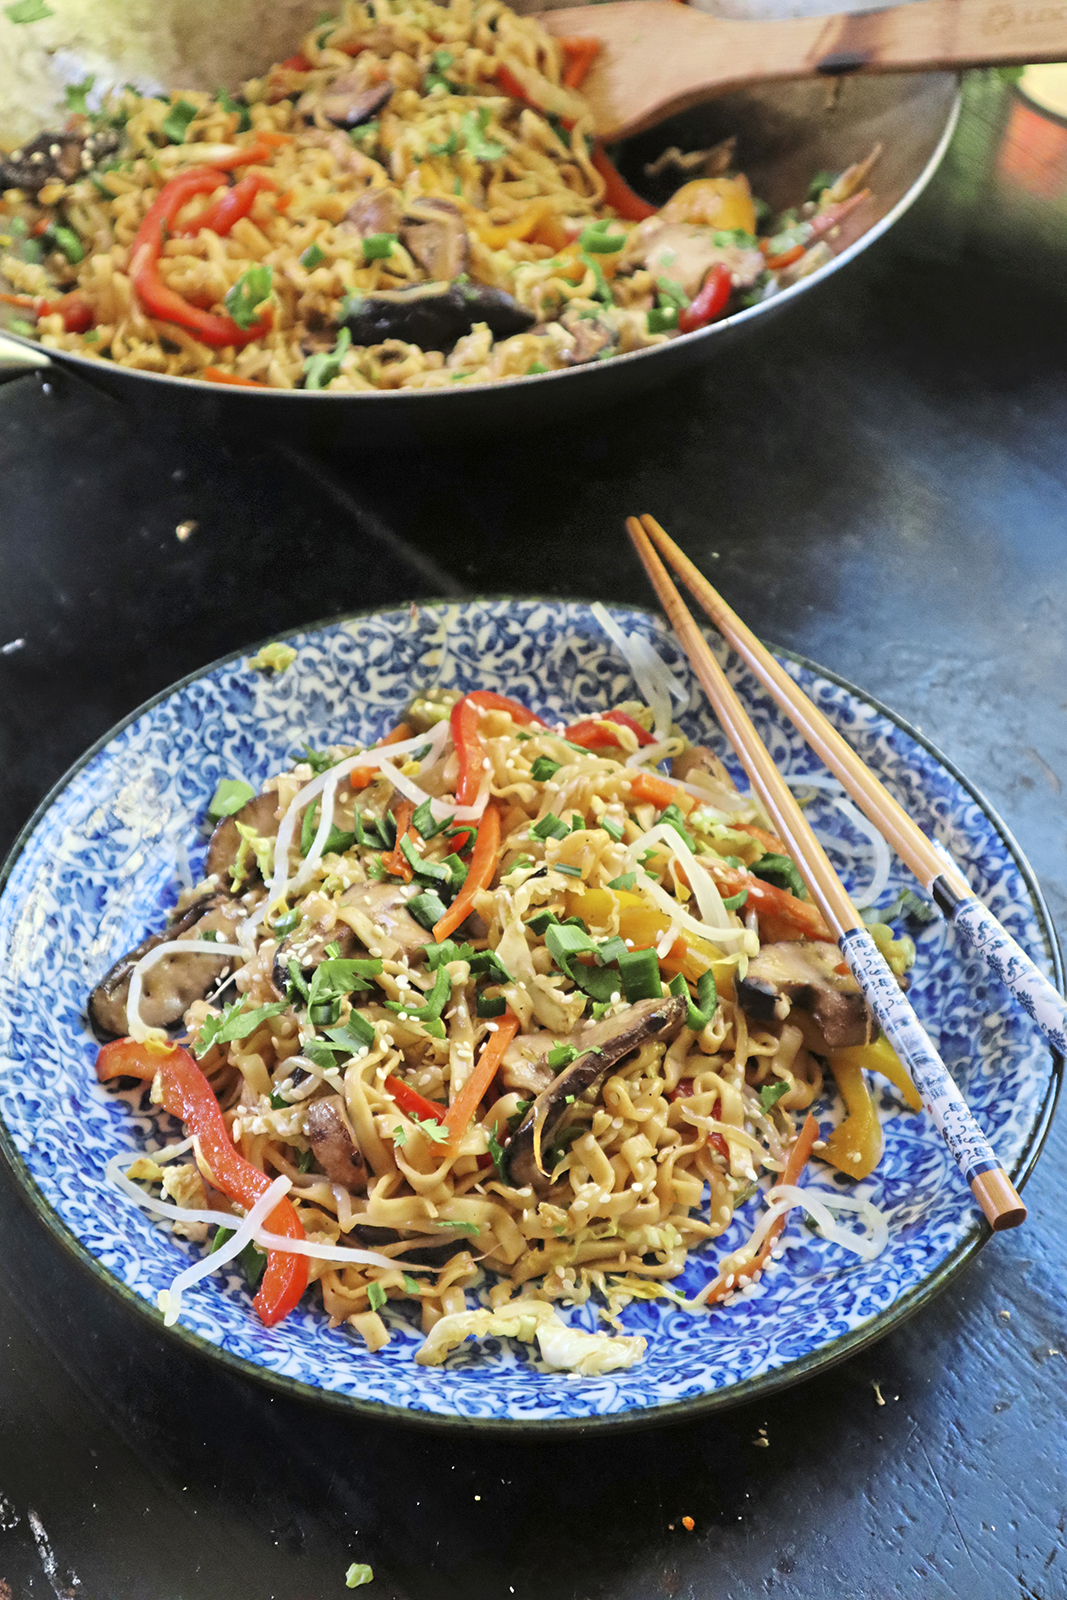 Shiitake mushrooms stand in for beef in this veggie-forward chow mein. (Gretchen McKay/Pittsburgh Post-Gazette/TNS)